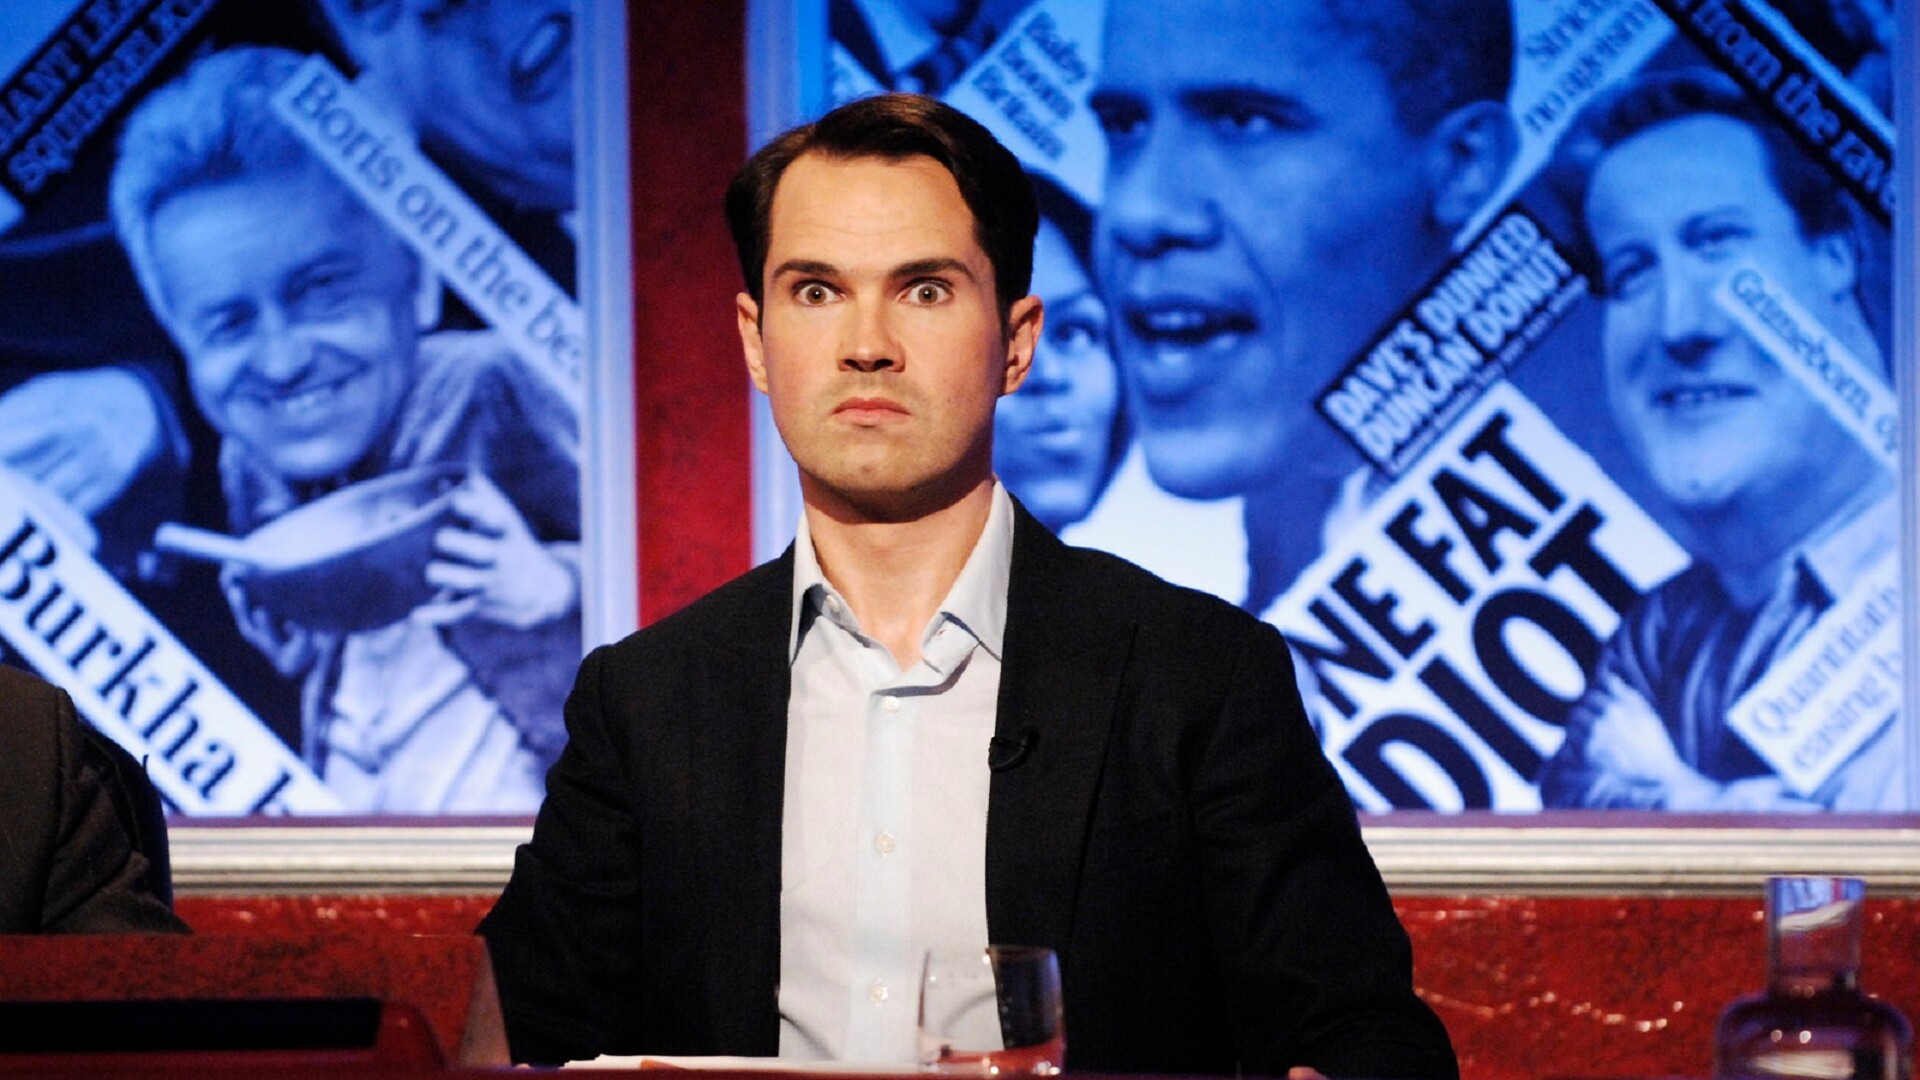 Jimmy Carr: Have I Got News for You, A British television panel show, Produced by Hat Trick Productions, BBC. 1920x1080 Full HD Wallpaper.